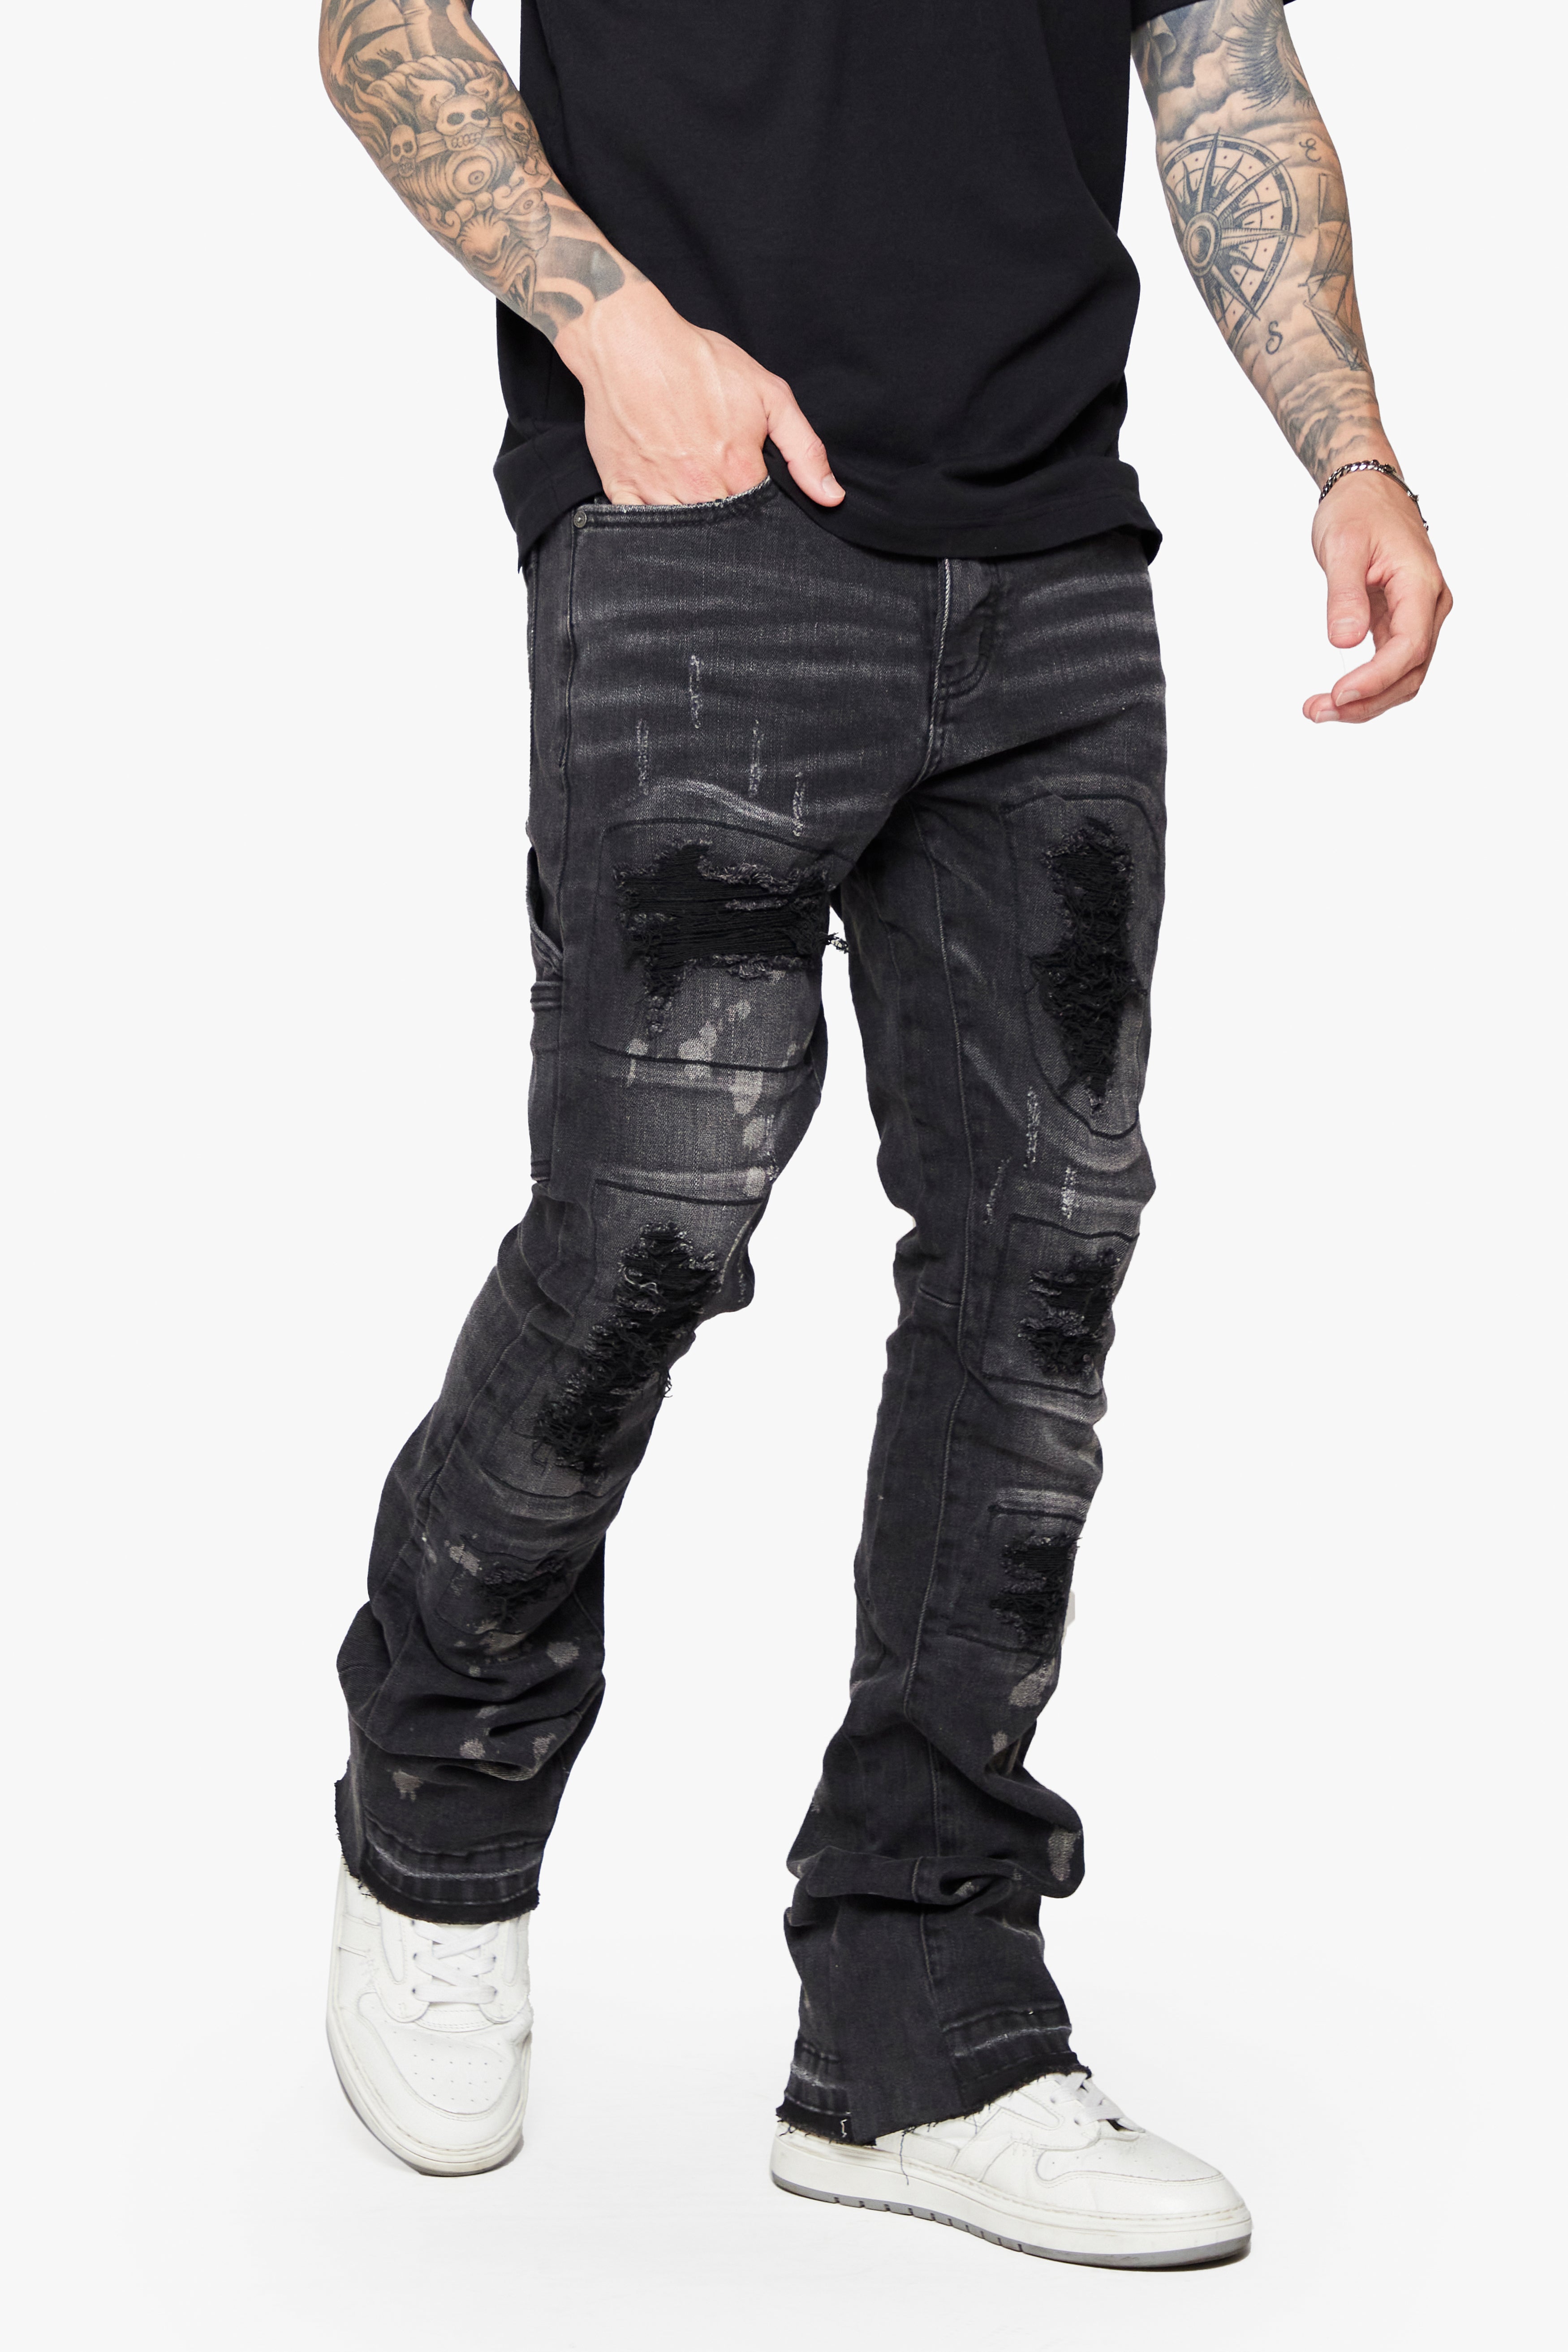 6thNBRHD STACKED "ASHES" -BLACK WASHED